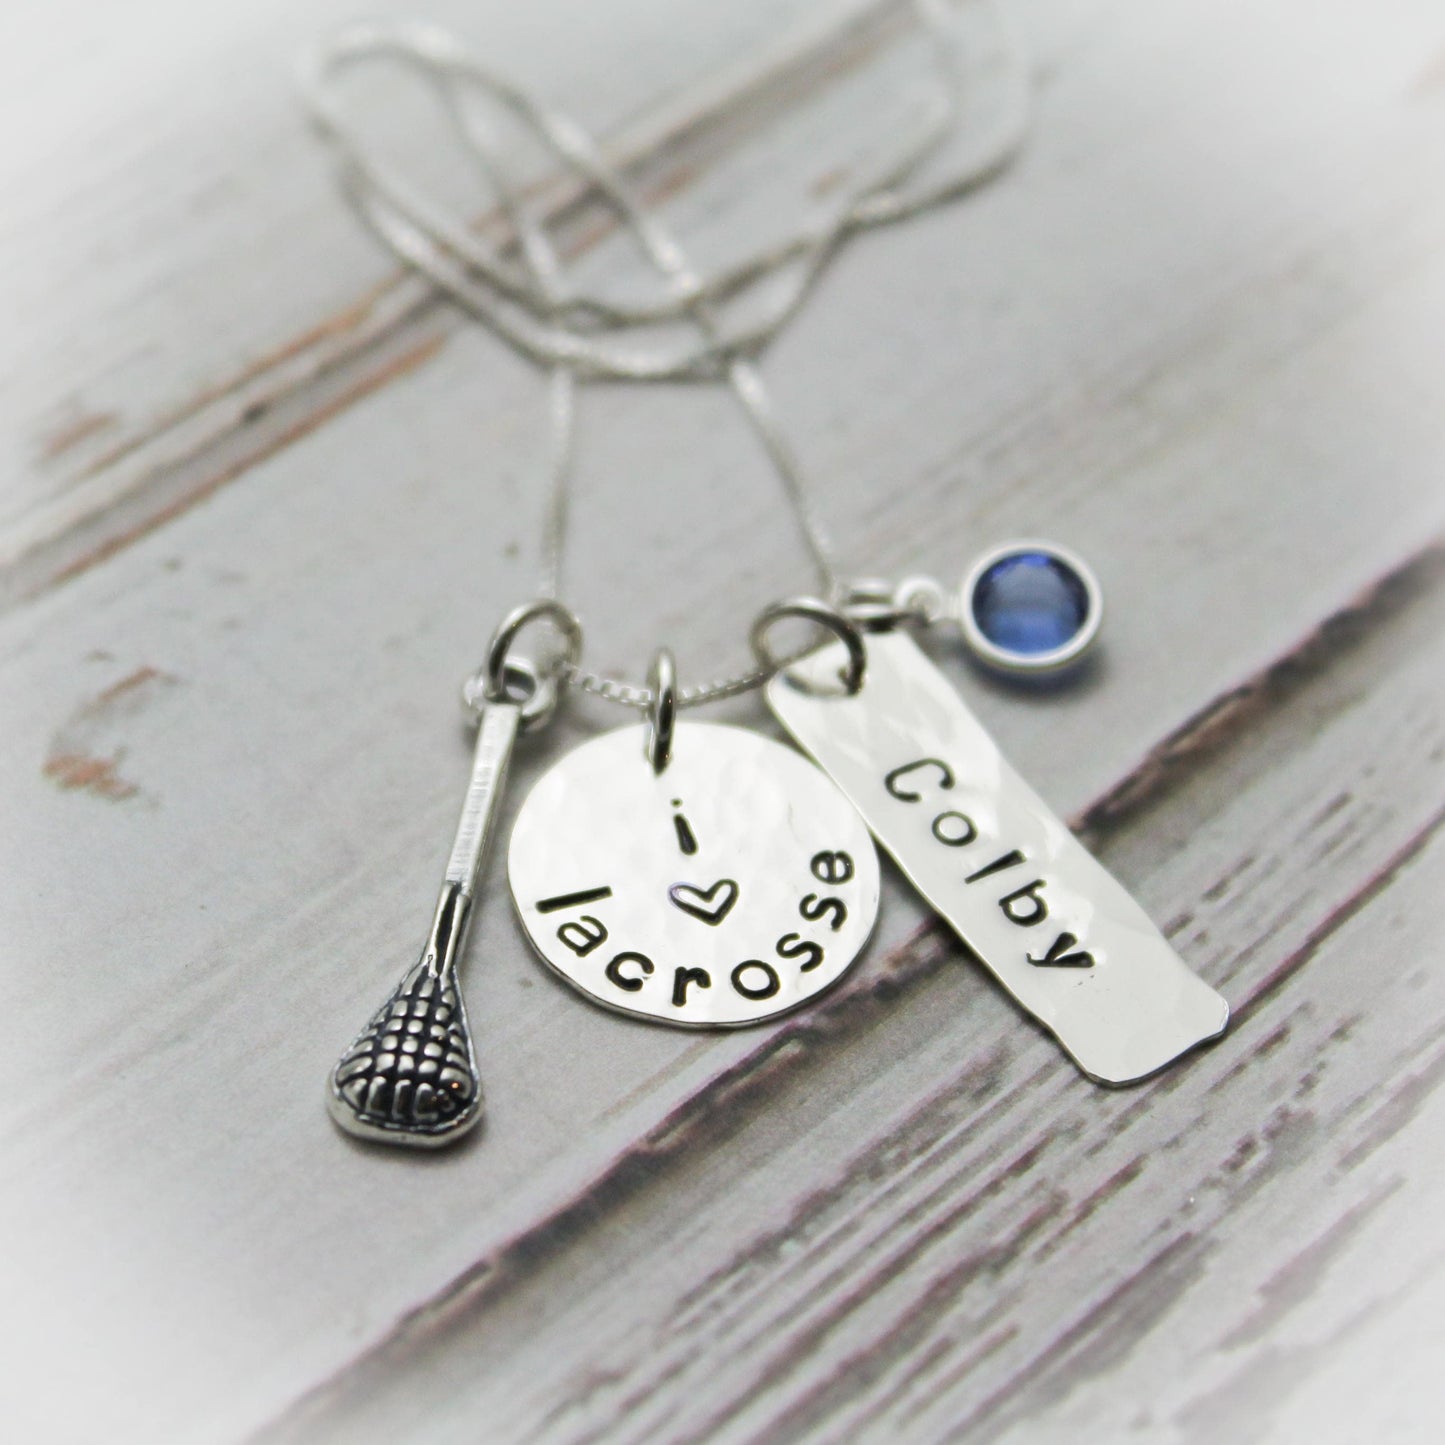 Personalized Lacrosse Necklace, Lacrosse Necklace, I Love Lacrosse Necklace, LAX Jewelry, Lacrosse Team Jewelry, Hand Stamped .925 silver